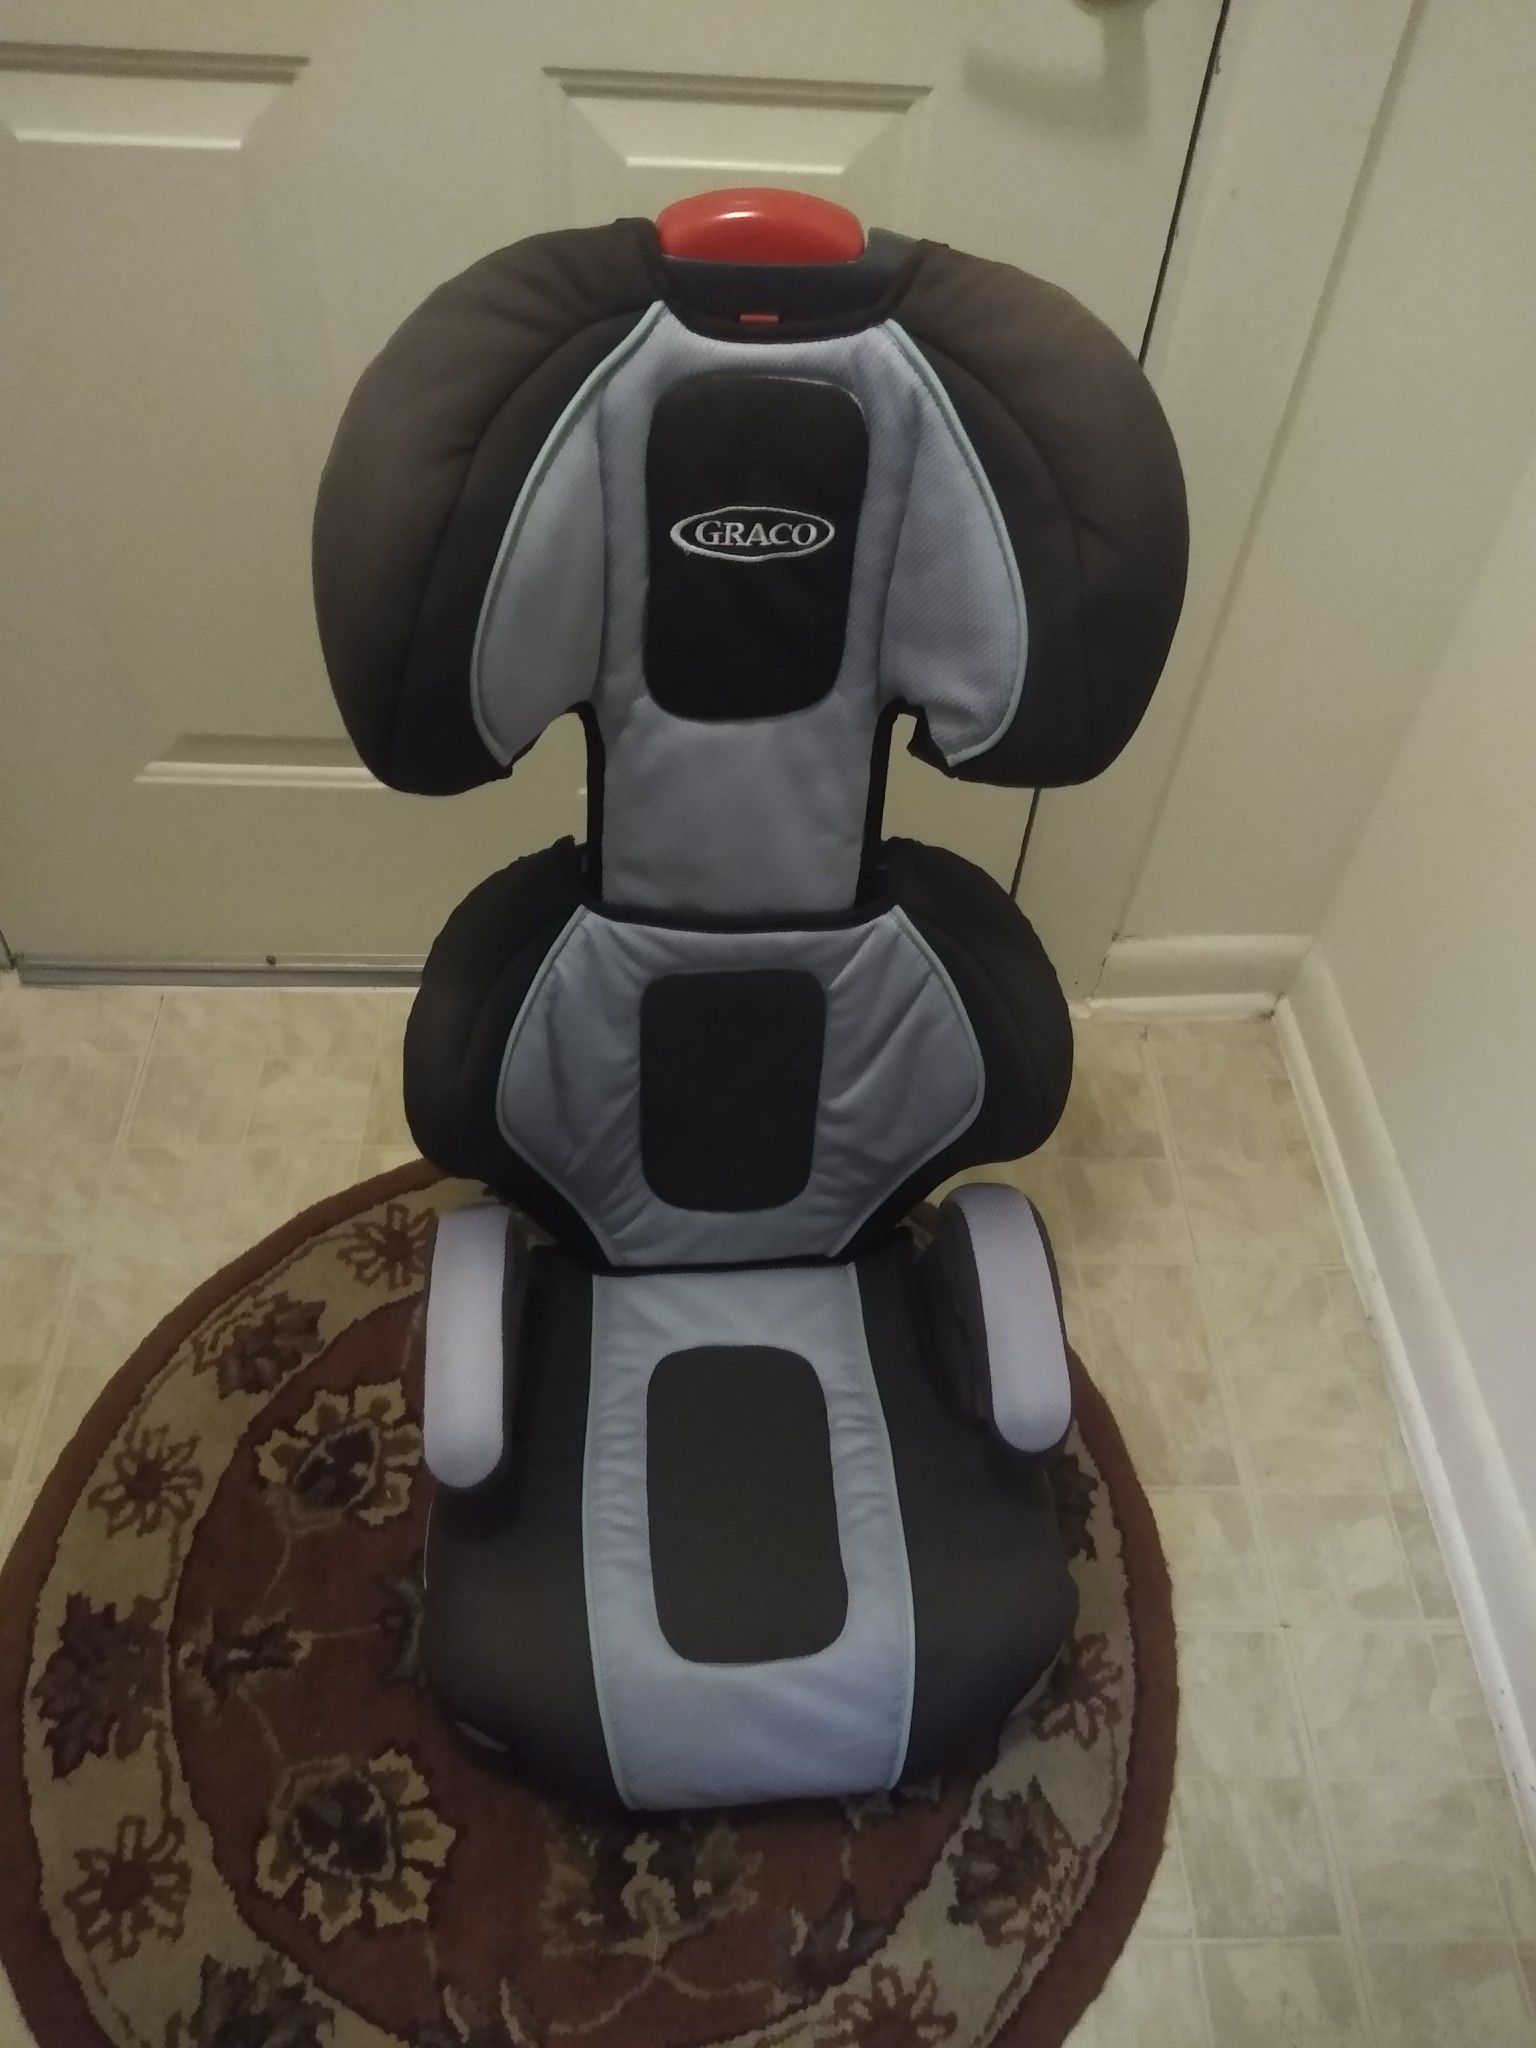 Two used booster seats 25.00 each are both for 40.00